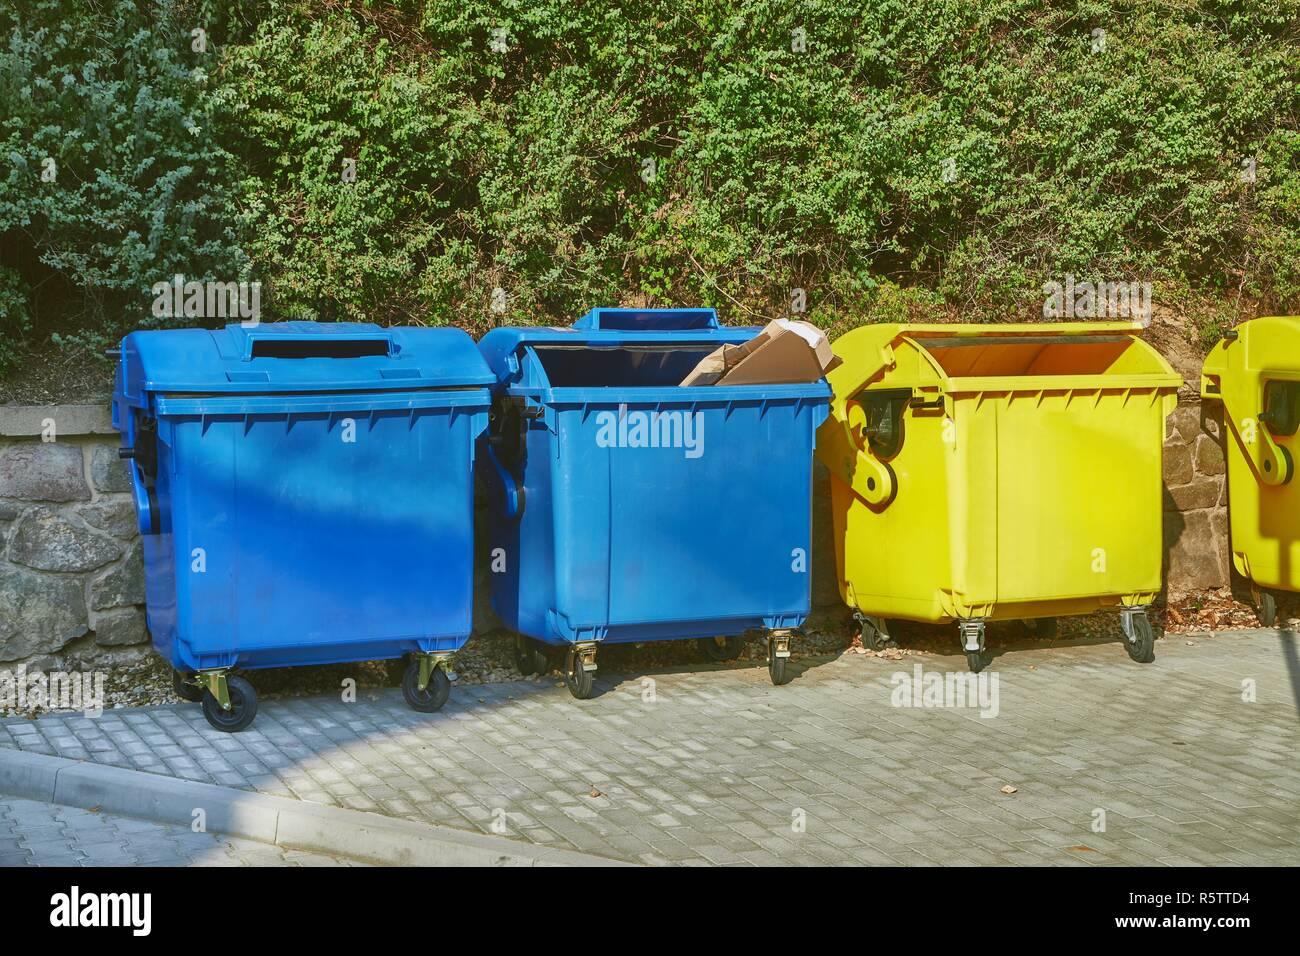 Dust bin containers Stock Photo - Alamy